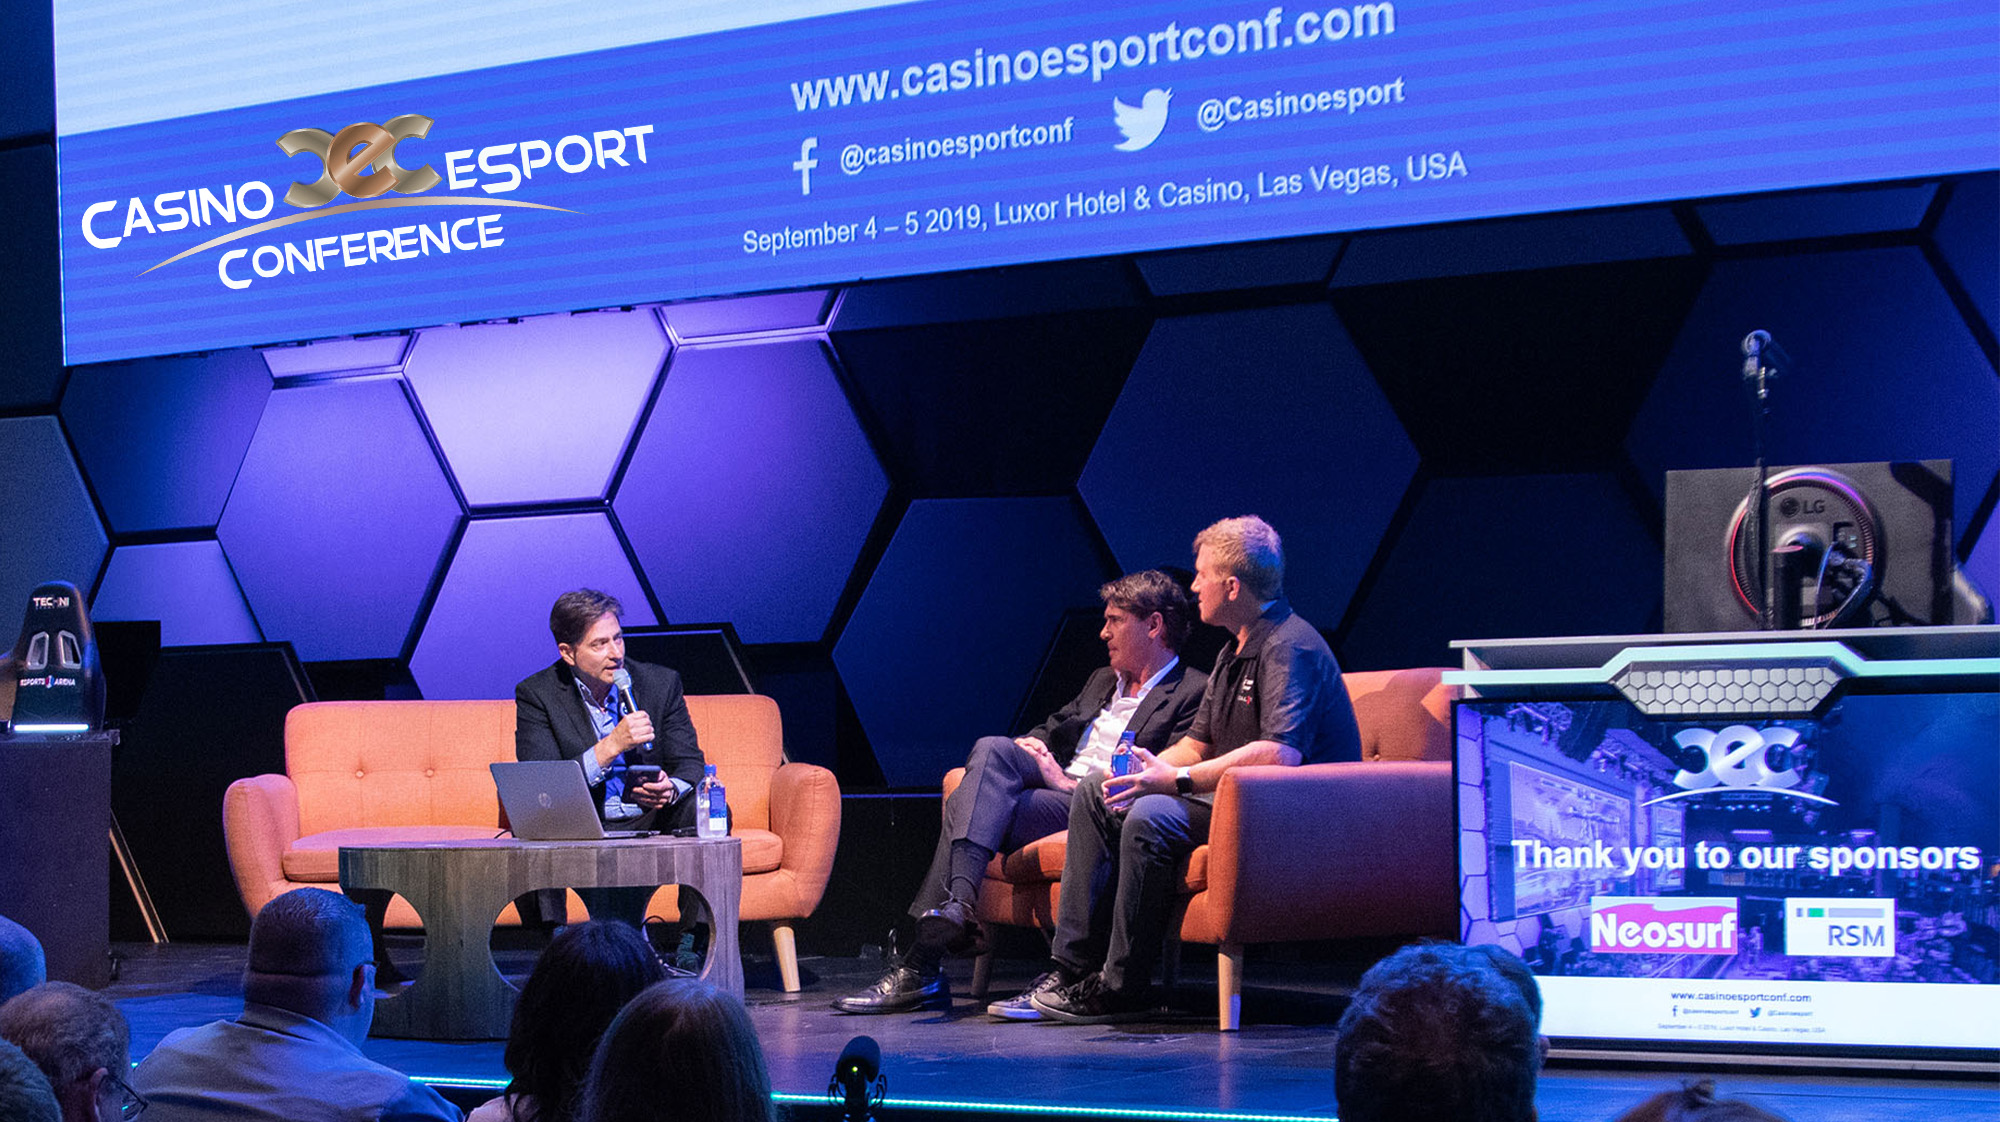 Legal and Regulatory Issues in Esports Are One of the Main Factors in This Year's Casino Esport Conference